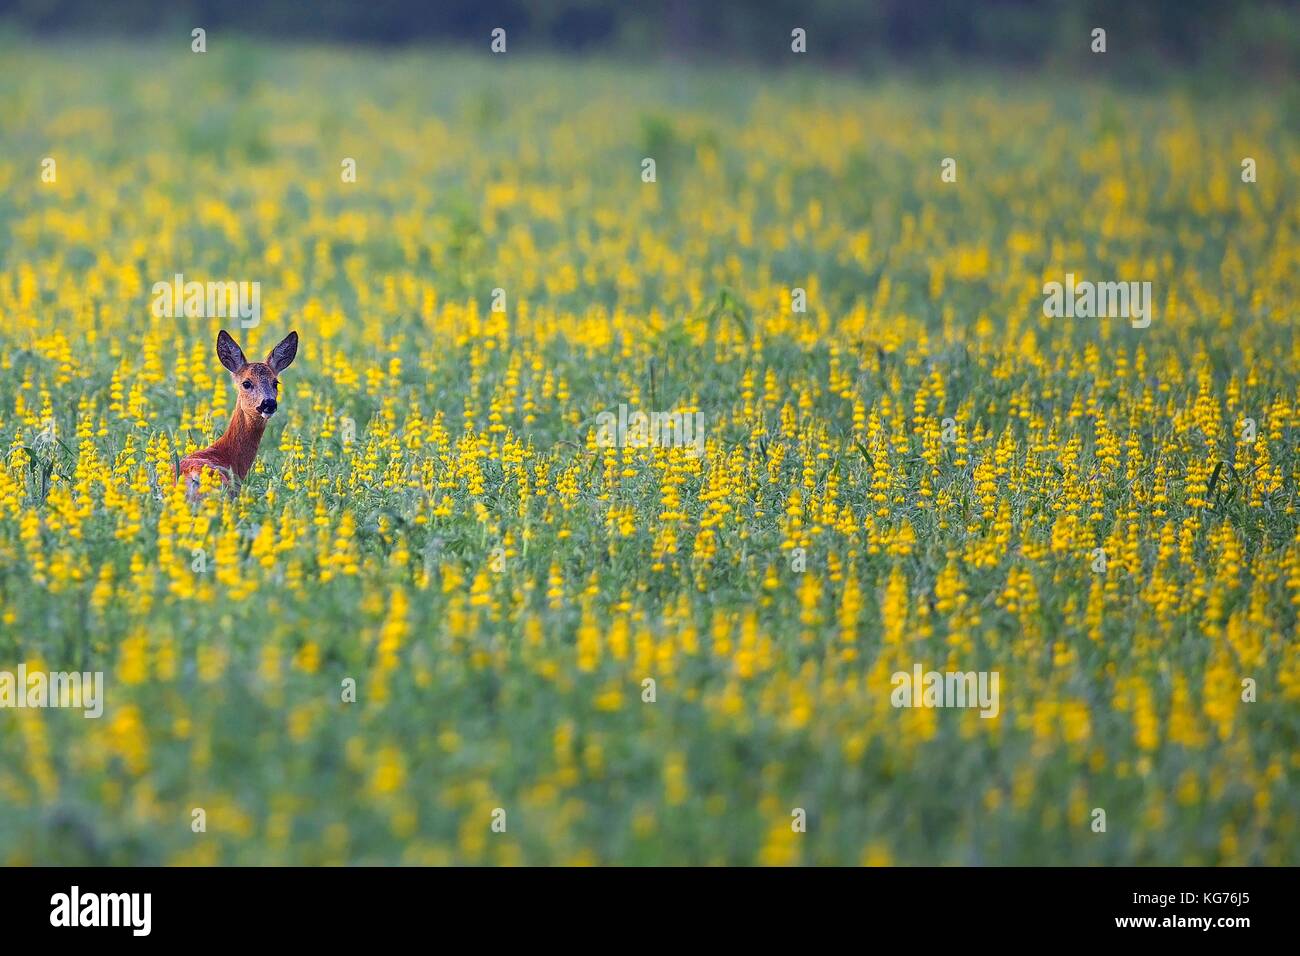 Roe deer in a clearing hidden in the flowers Stock Photo